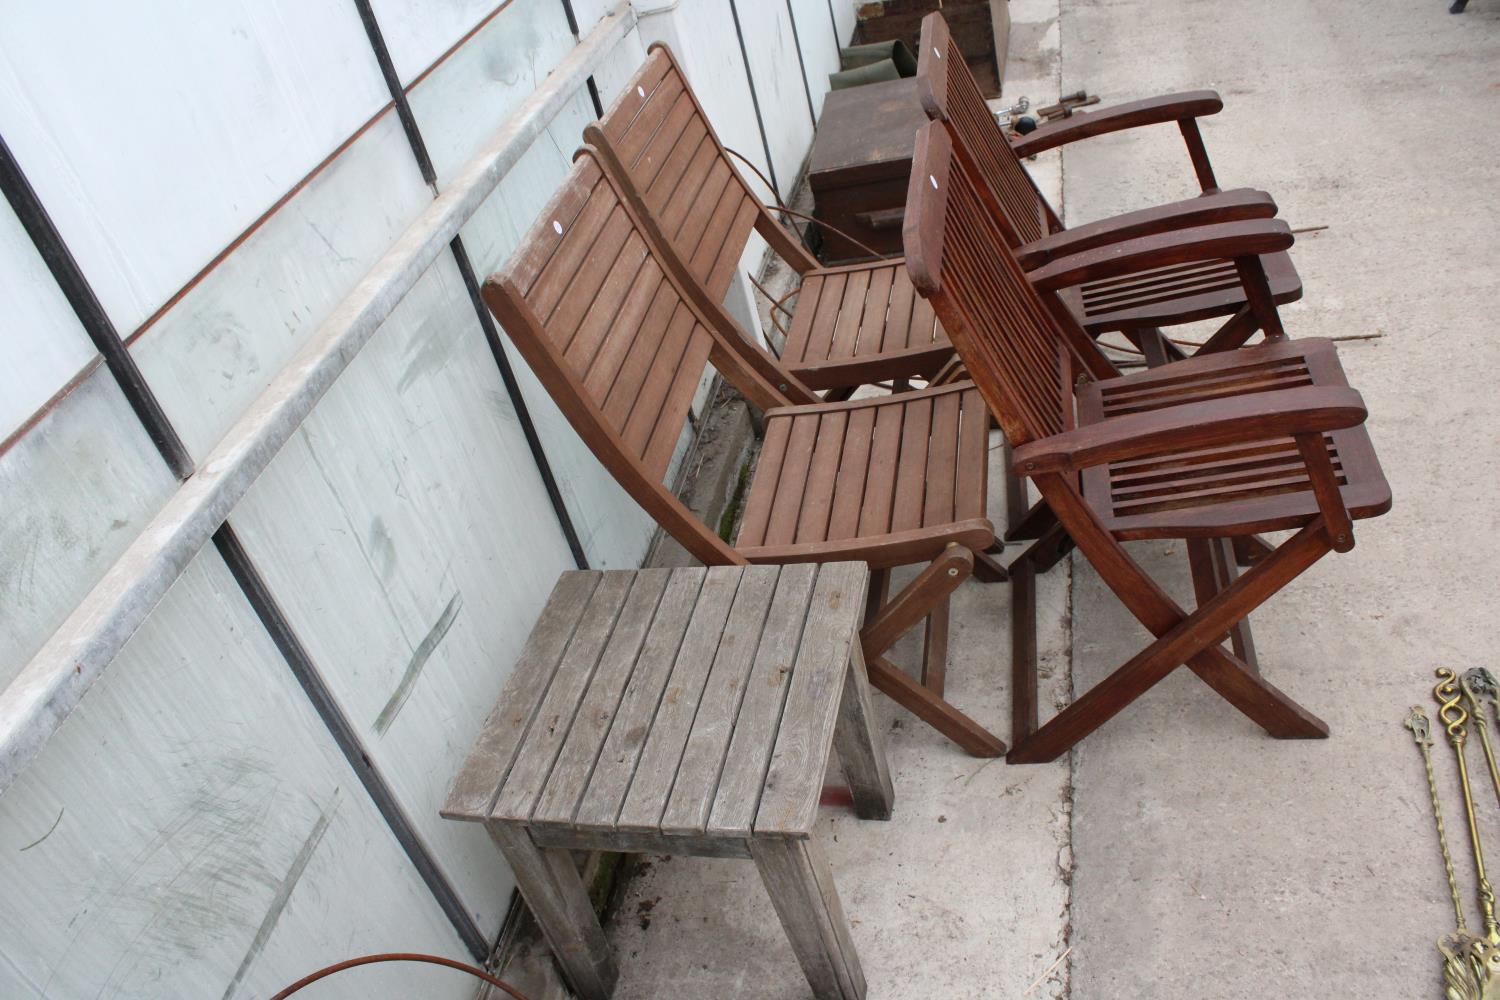 TWO PAIRS OF TEAK FOLDING CHAIRS AND A WOODEN SLATTED TABLE - Image 2 of 4